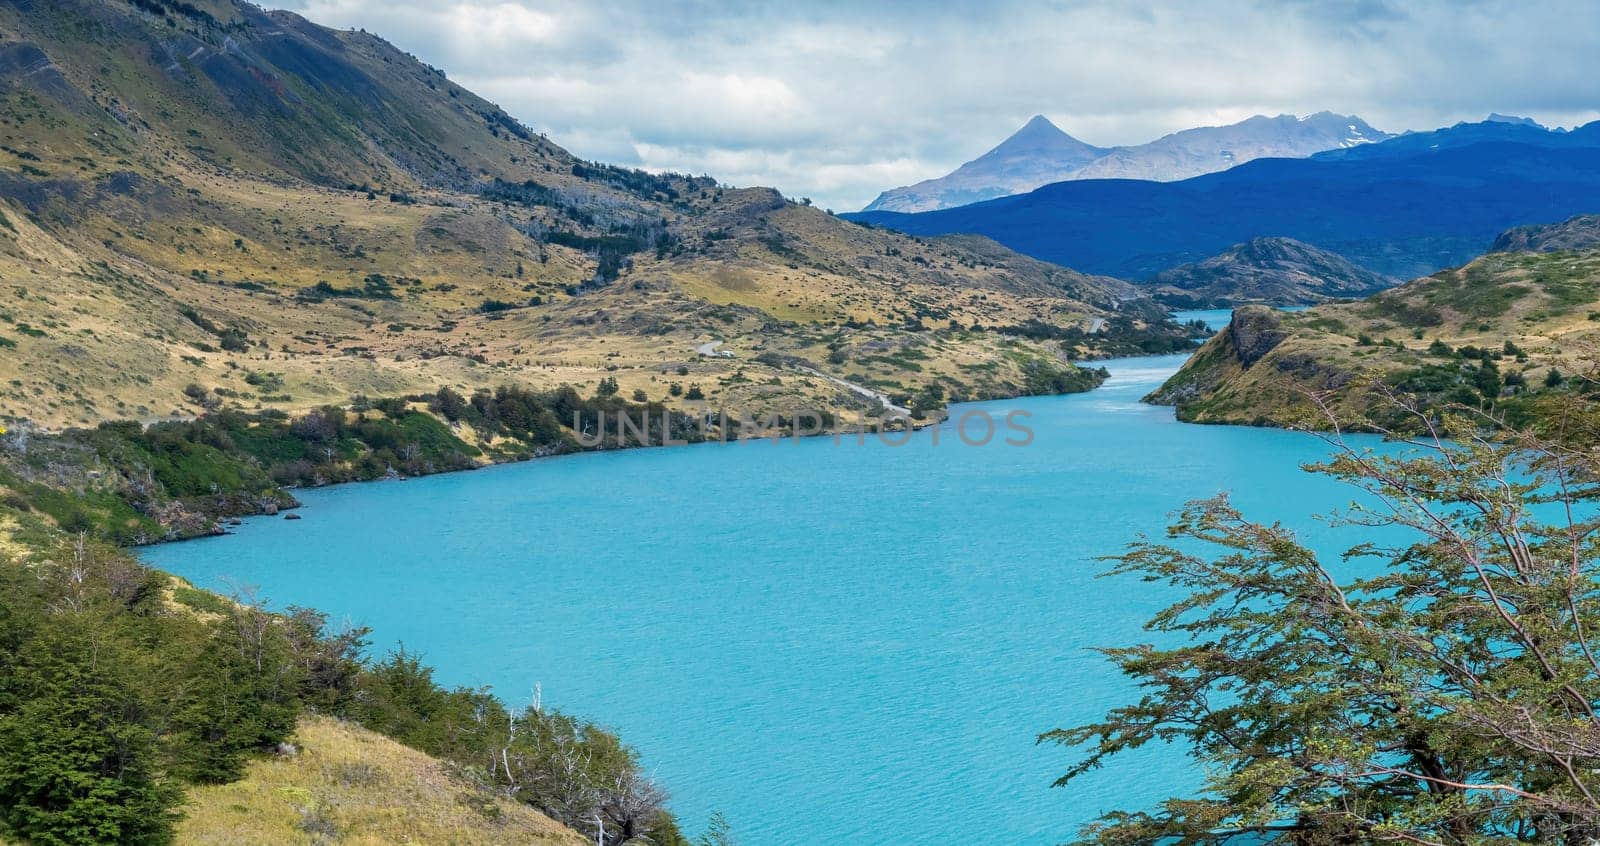 Secluded turquoise lake surrounded by mountains offering a tranquil setting.